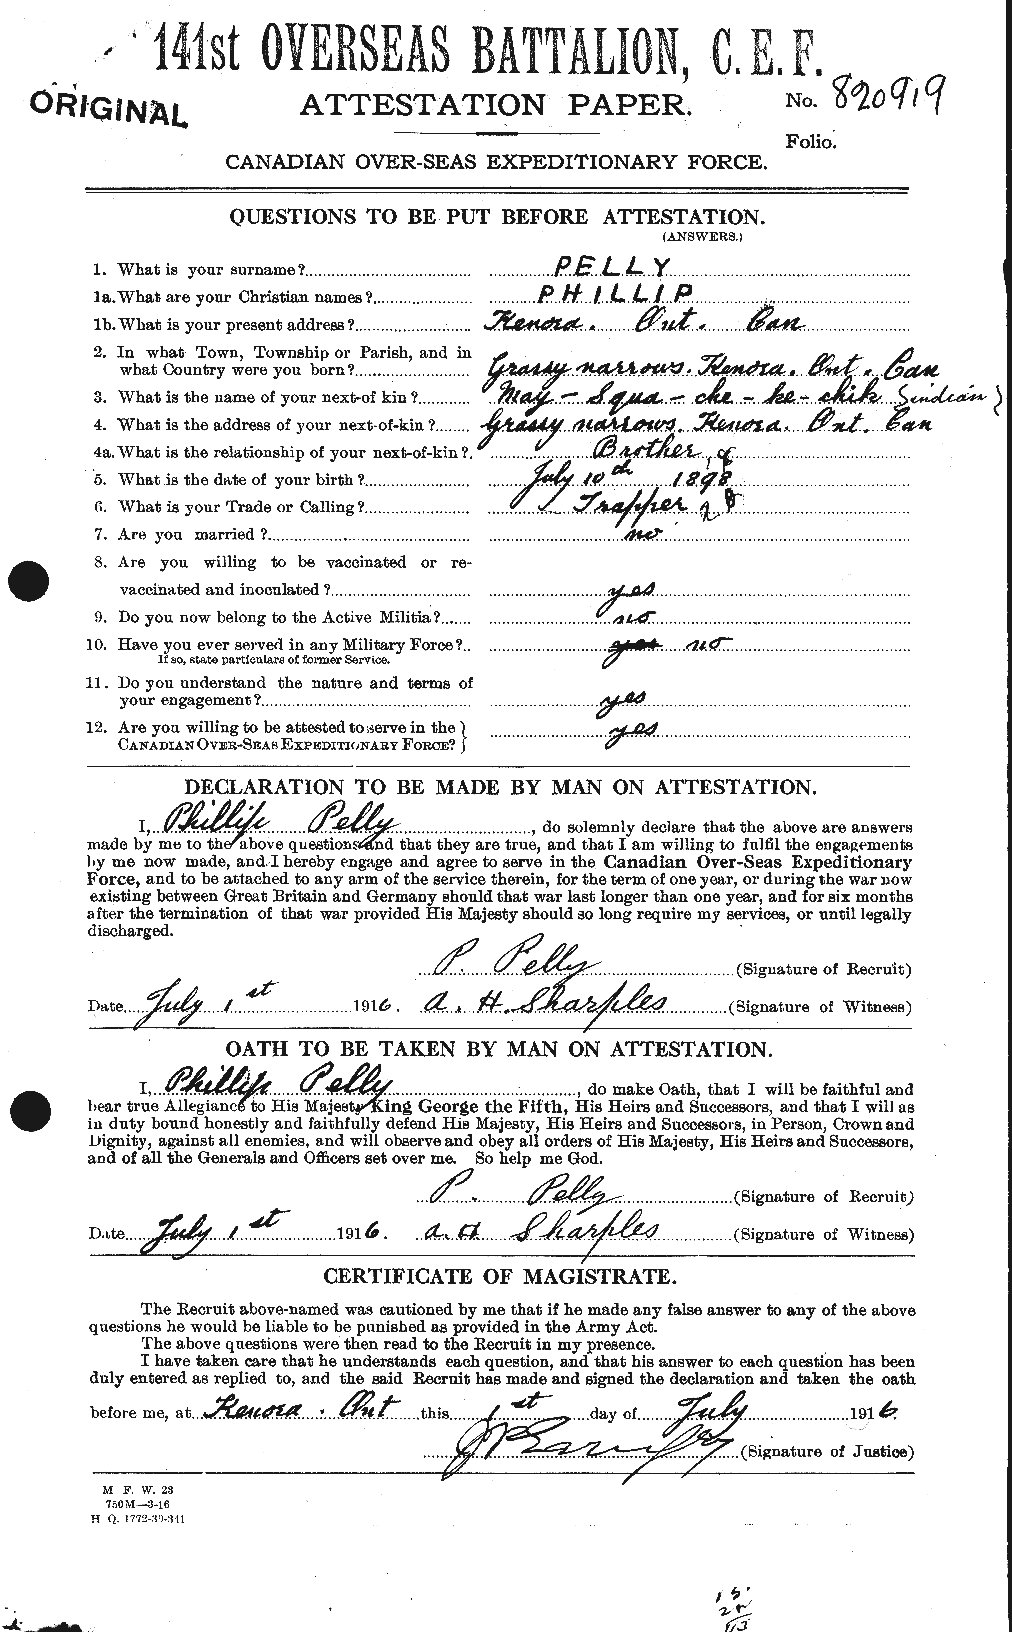 Personnel Records of the First World War - CEF 572660a